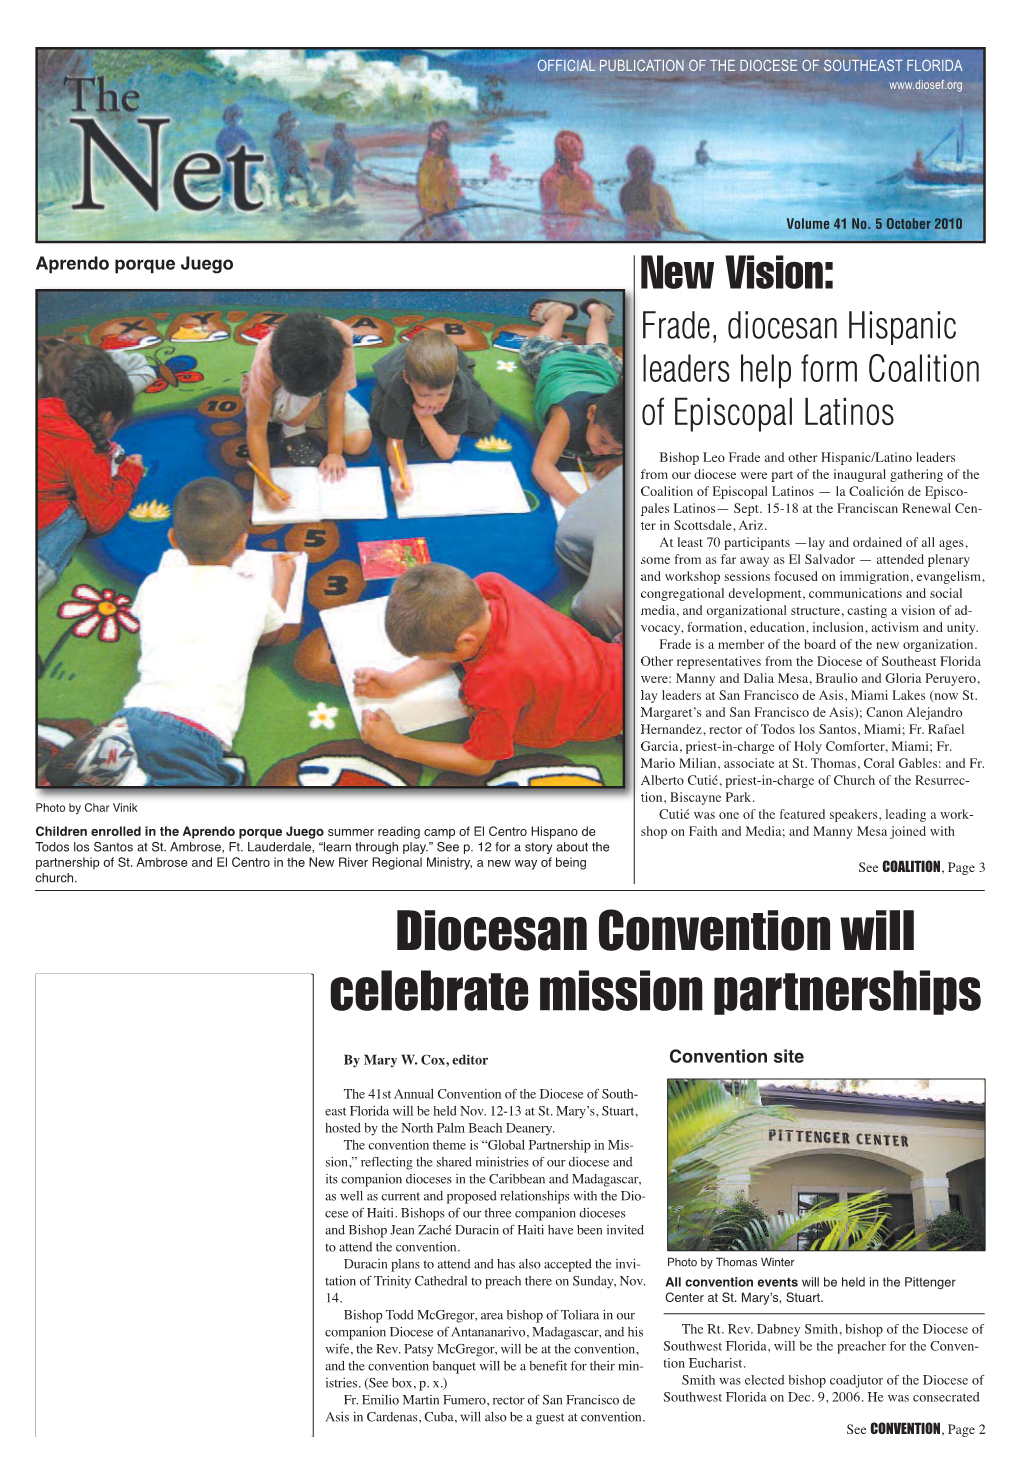 Diocesan Convention Will Celebrate Mission Partnerships